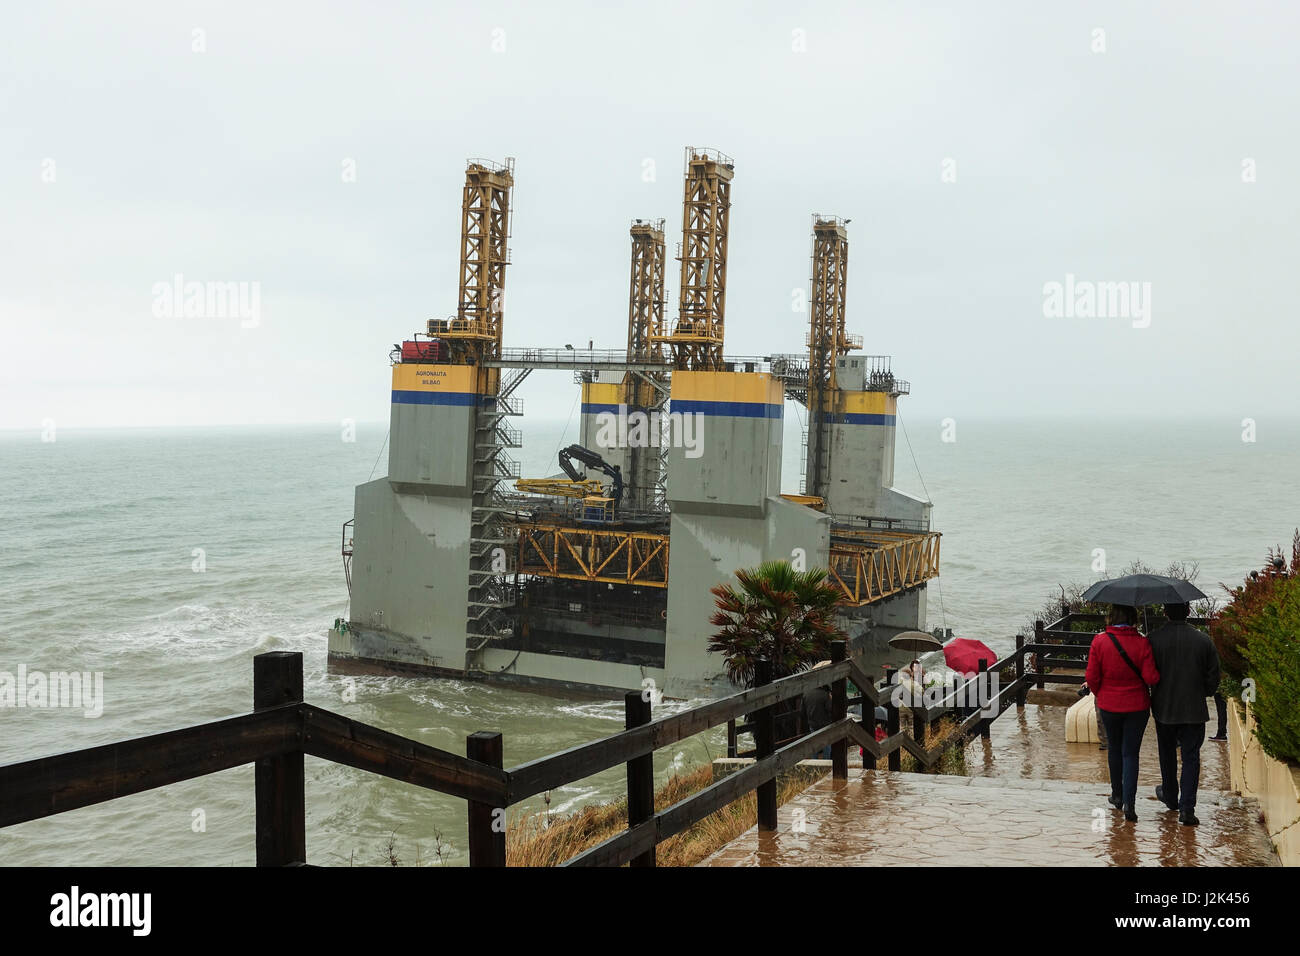 Benalmadena, Andalusia, Spain, 29 april 2017. Industrial Platform drifting off Benalmádena coastline runs aground at Costa del Sol. The platform was being towed to Malaga when the steel cable broke due to the rough seas, Spanish coast.  © Perry van Munster/ Alamy Live News Stock Photo